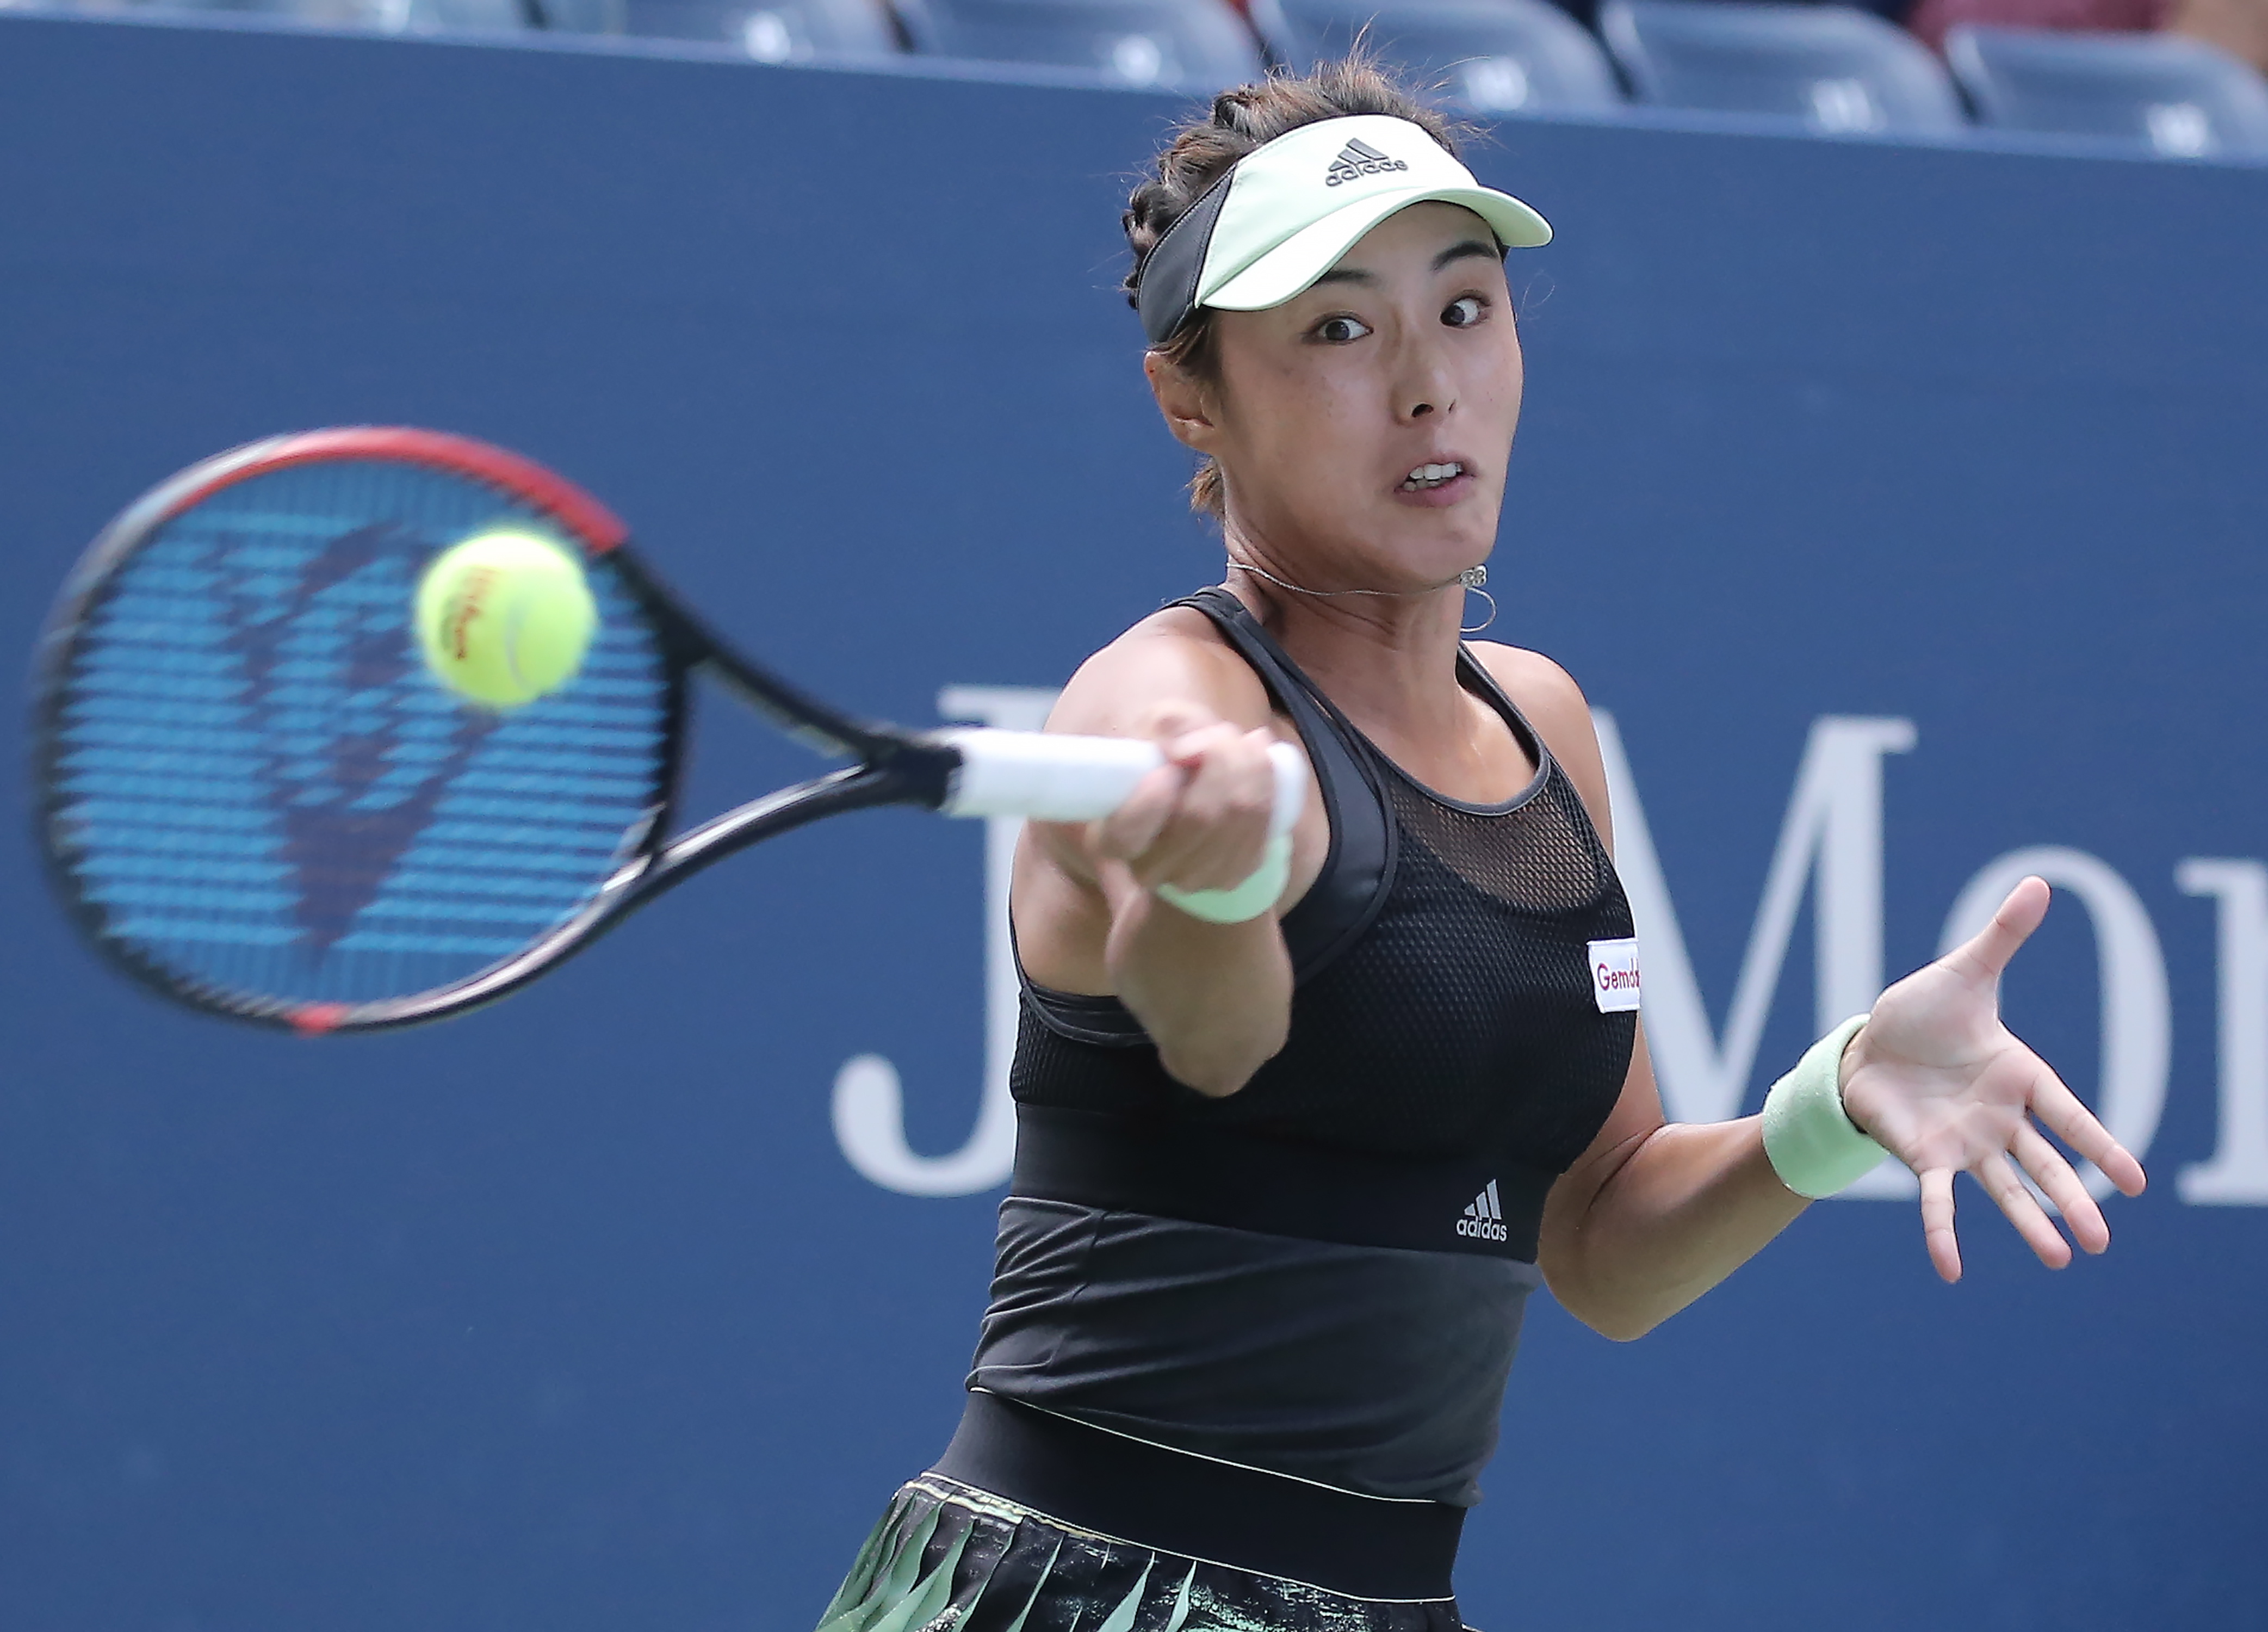 epa07810781 Qiang Wang of China hits a return to Ashleigh Barty of Australia during their match on the seventh day of the US Open Tennis Championships the USTA National Tennis Center in Flushing Meadows, New York, USA, 01 September 2019. The US Open runs from 26 August through 08 September.  EPA/PETER FOLEY